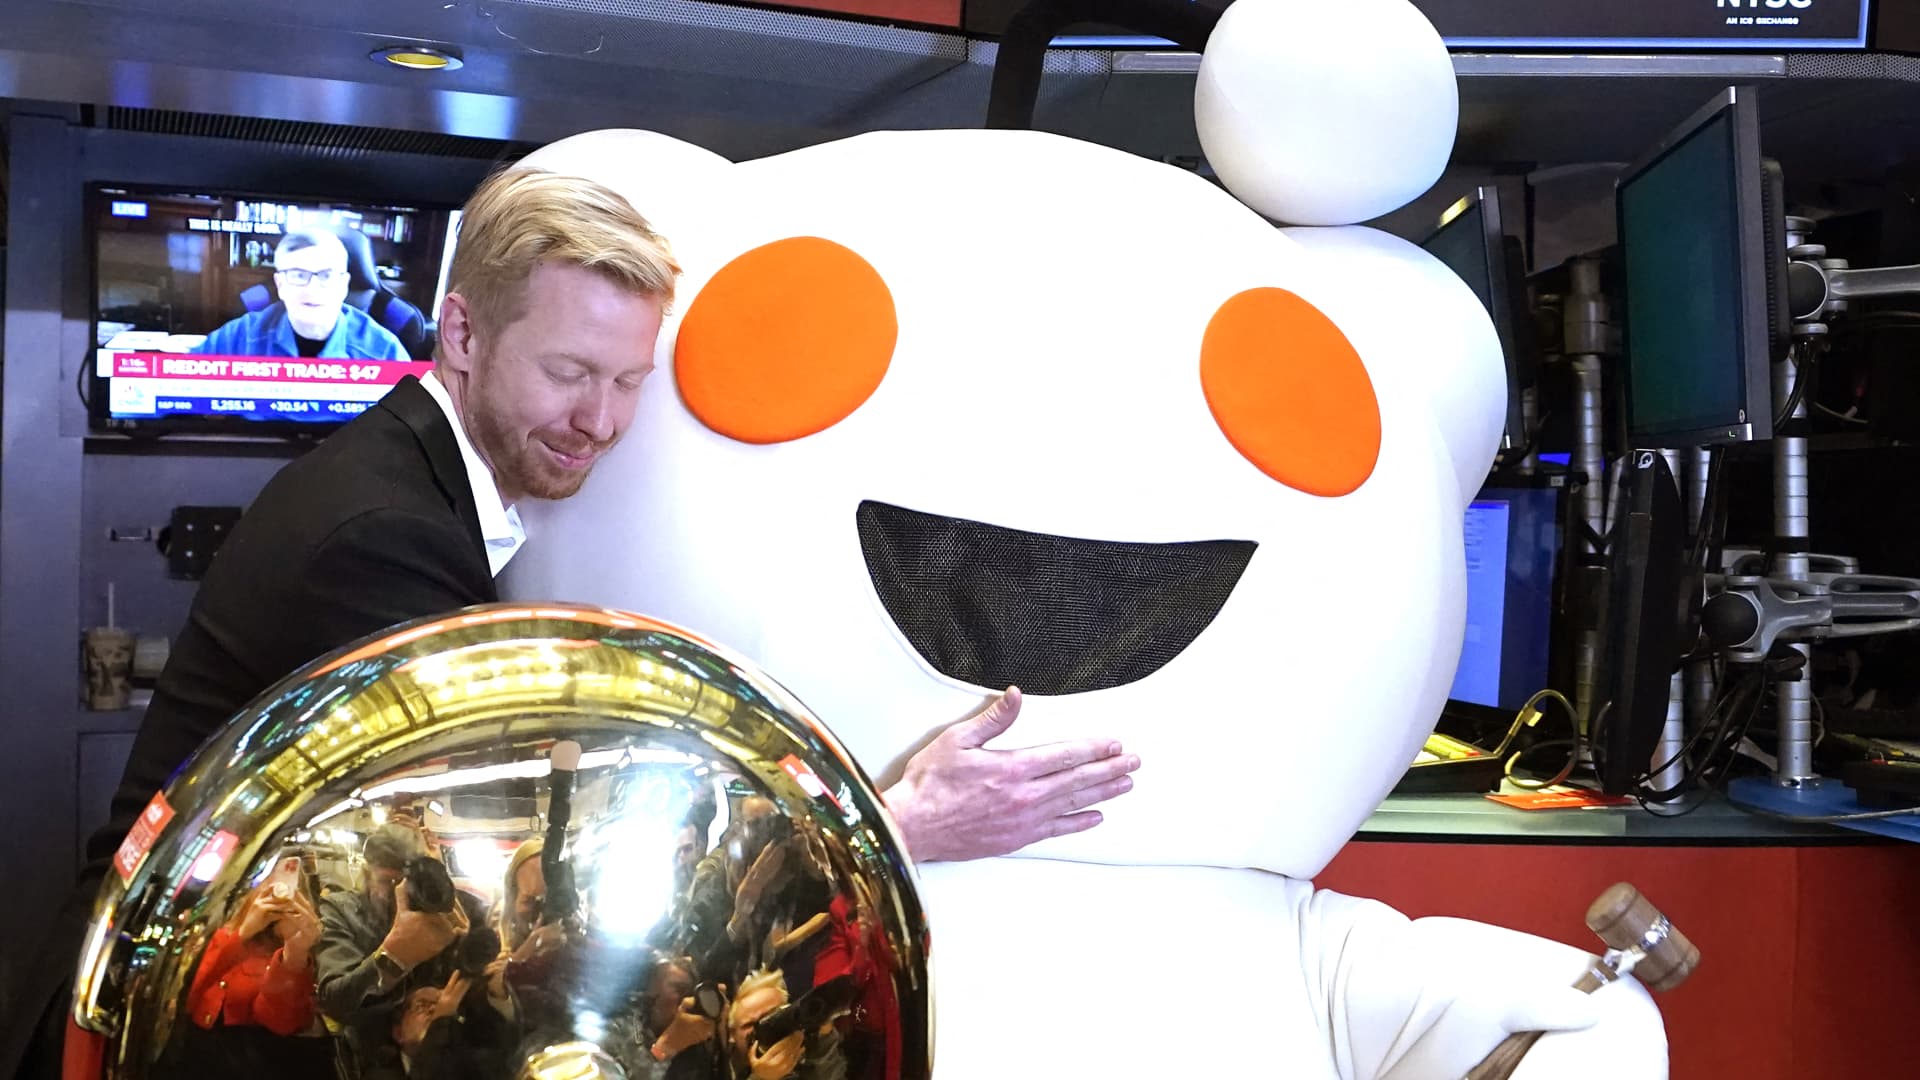 Reddit shares soar almost 20% after company reports revenue pop in debut earnings report